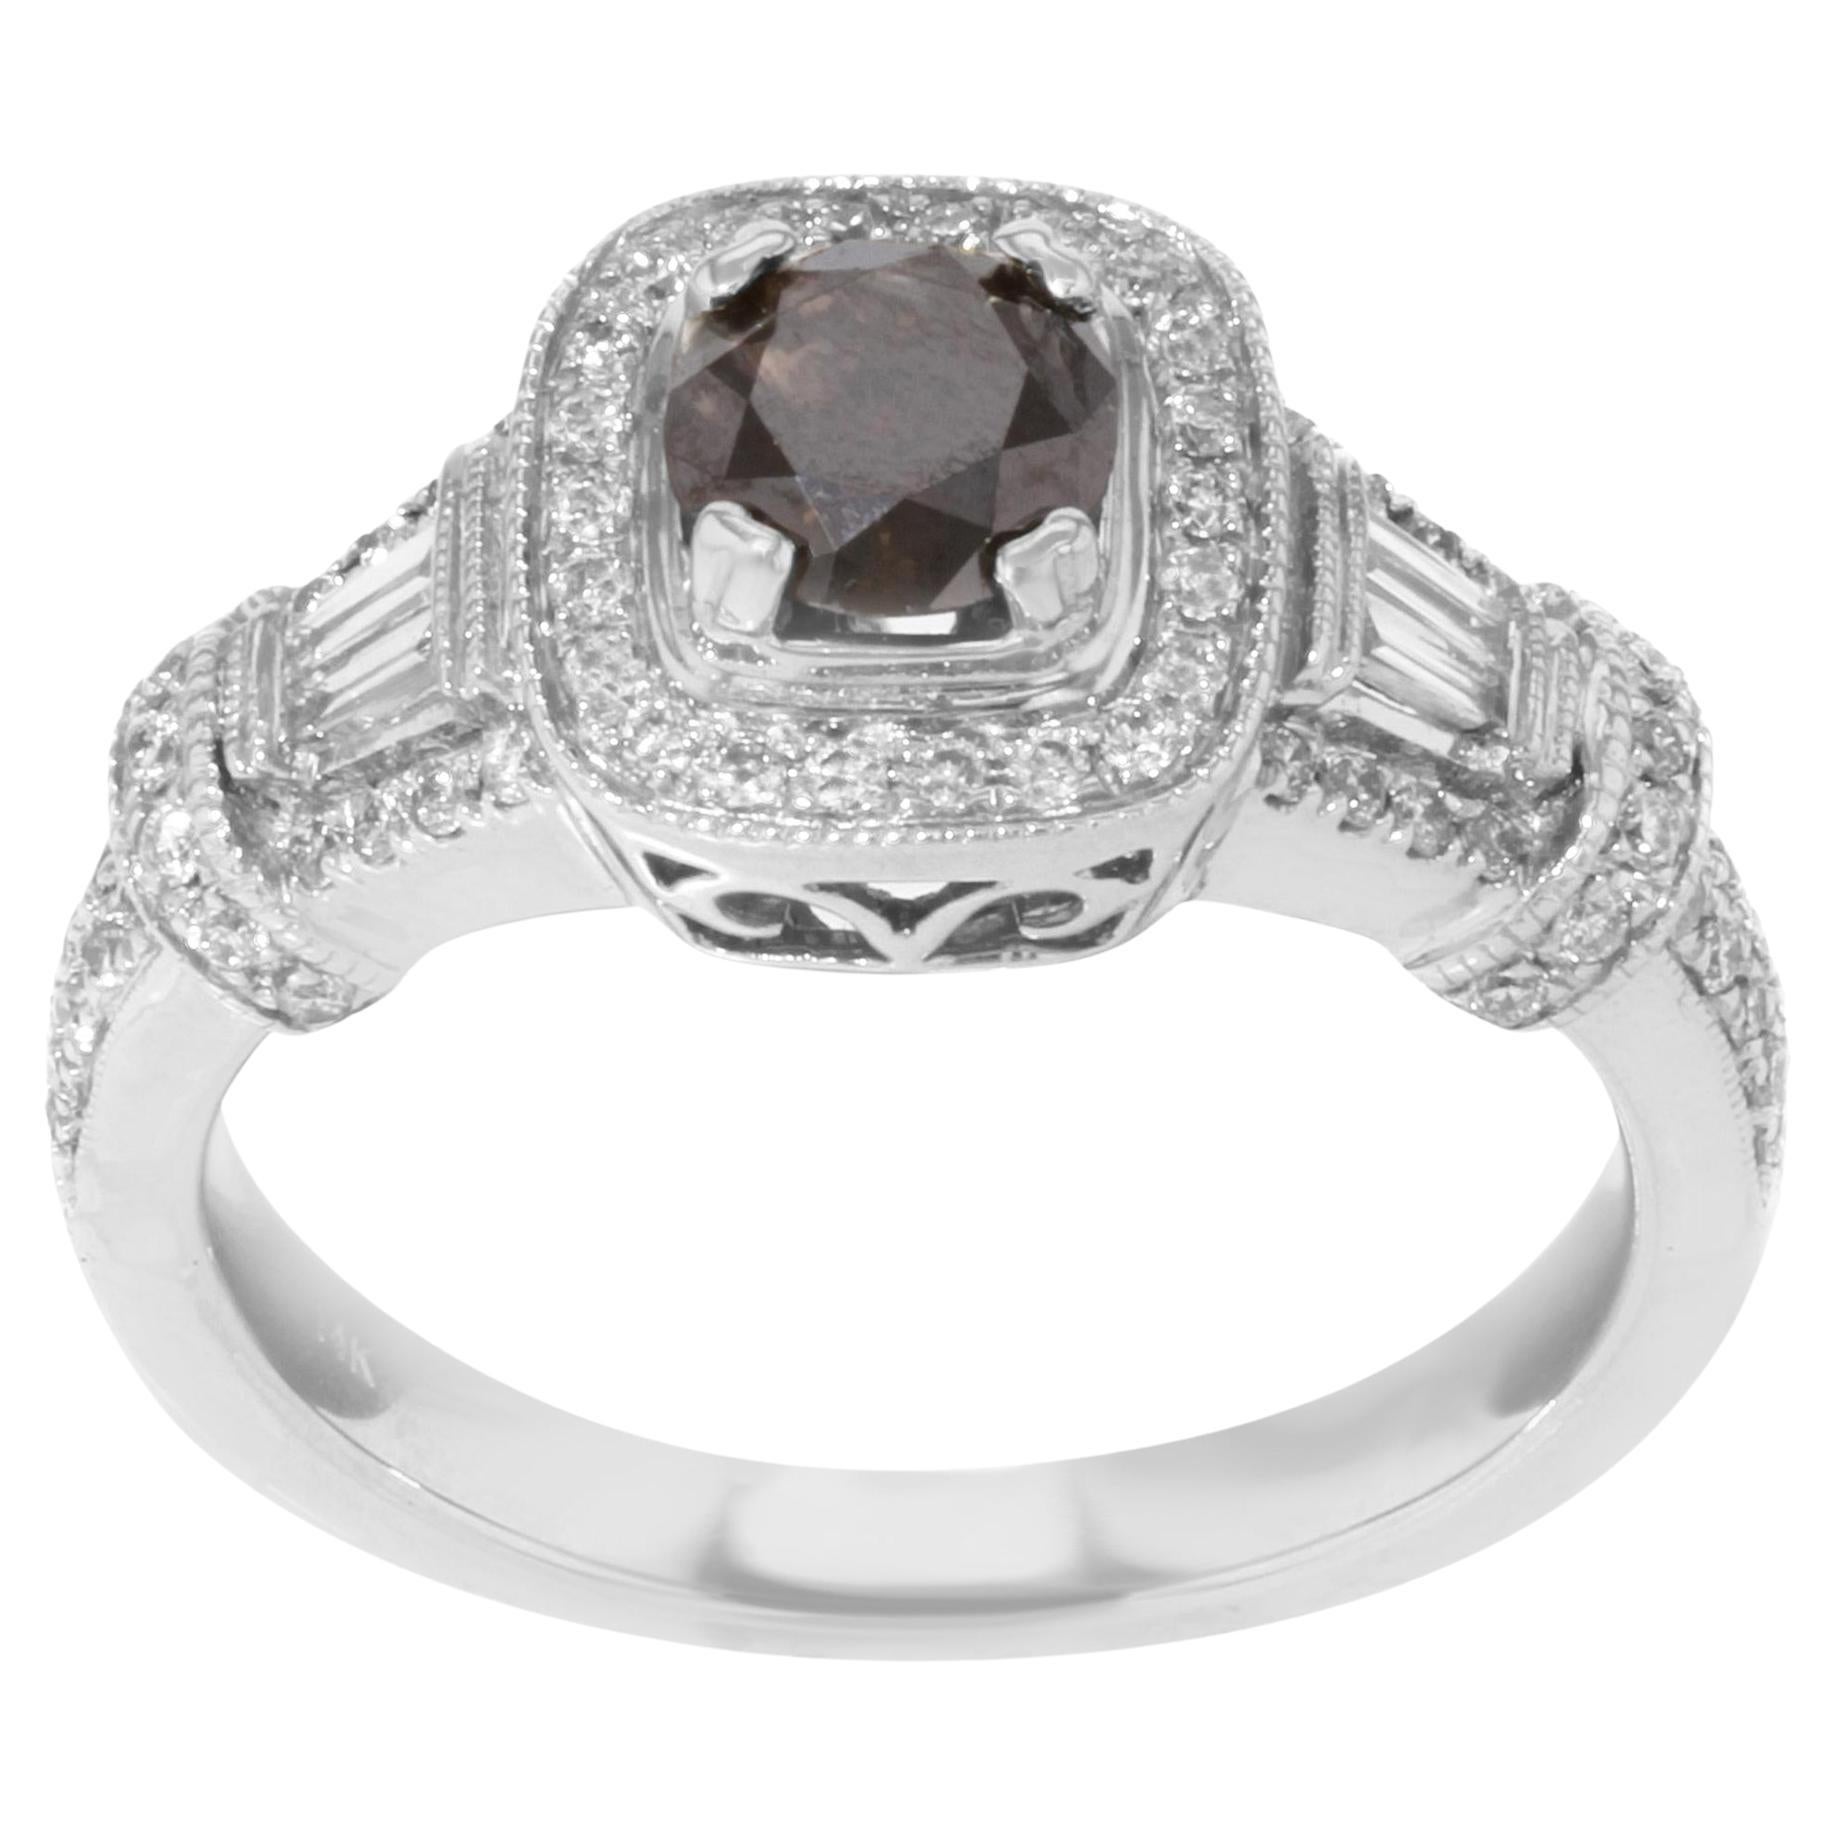 Brown Diamond Accented Ladies Engagement Ring 14K White Gold 1.84 Cttw For Sale